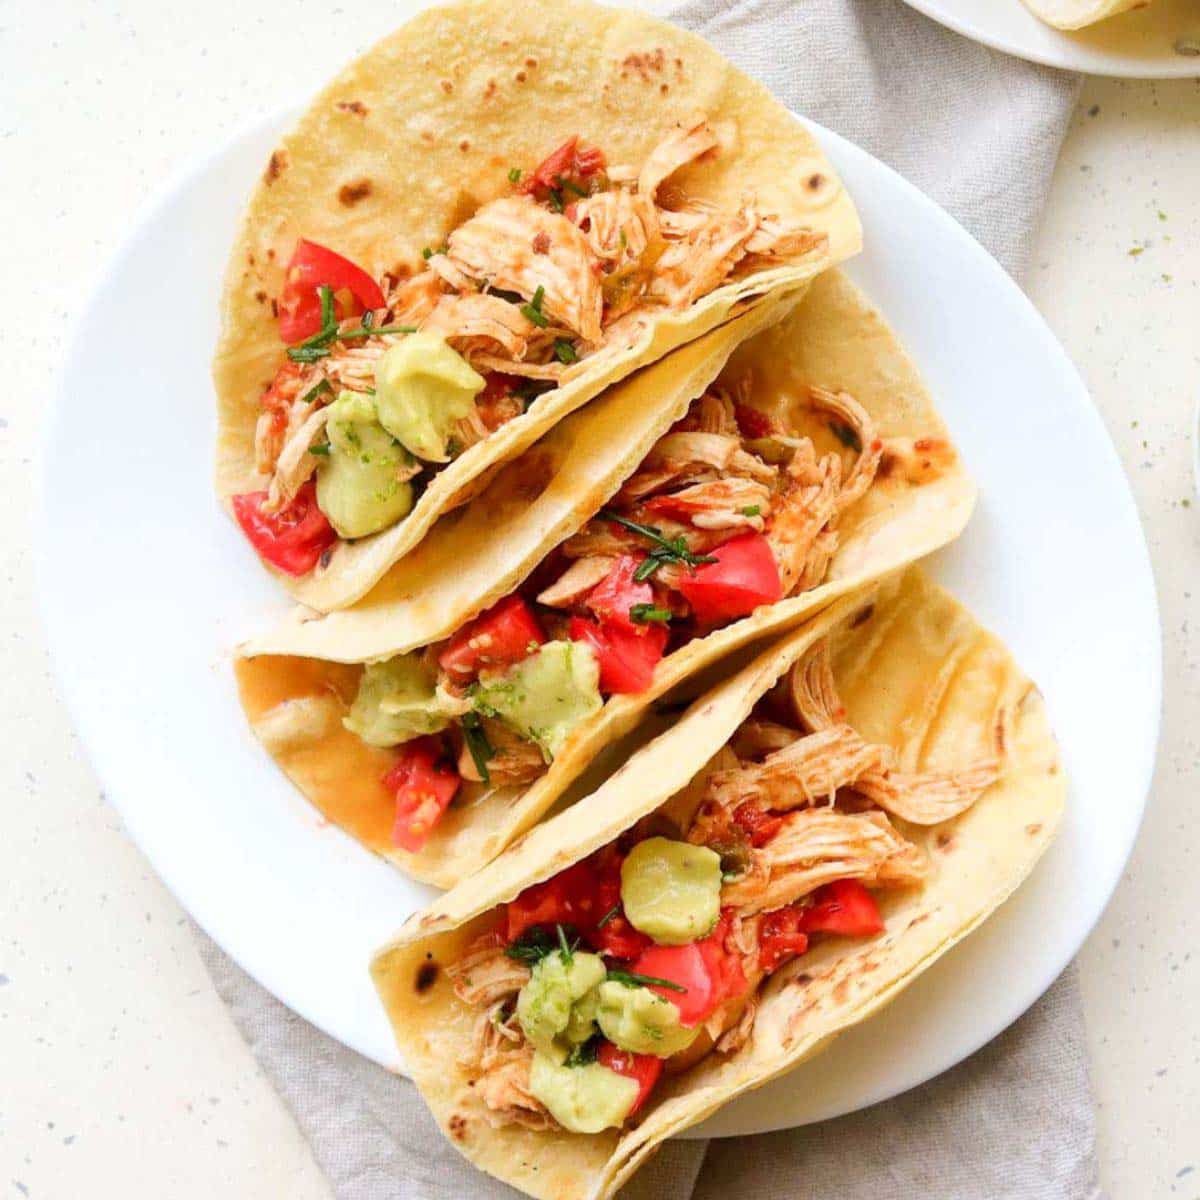 Thumbnail of low calorie chicken tacos.